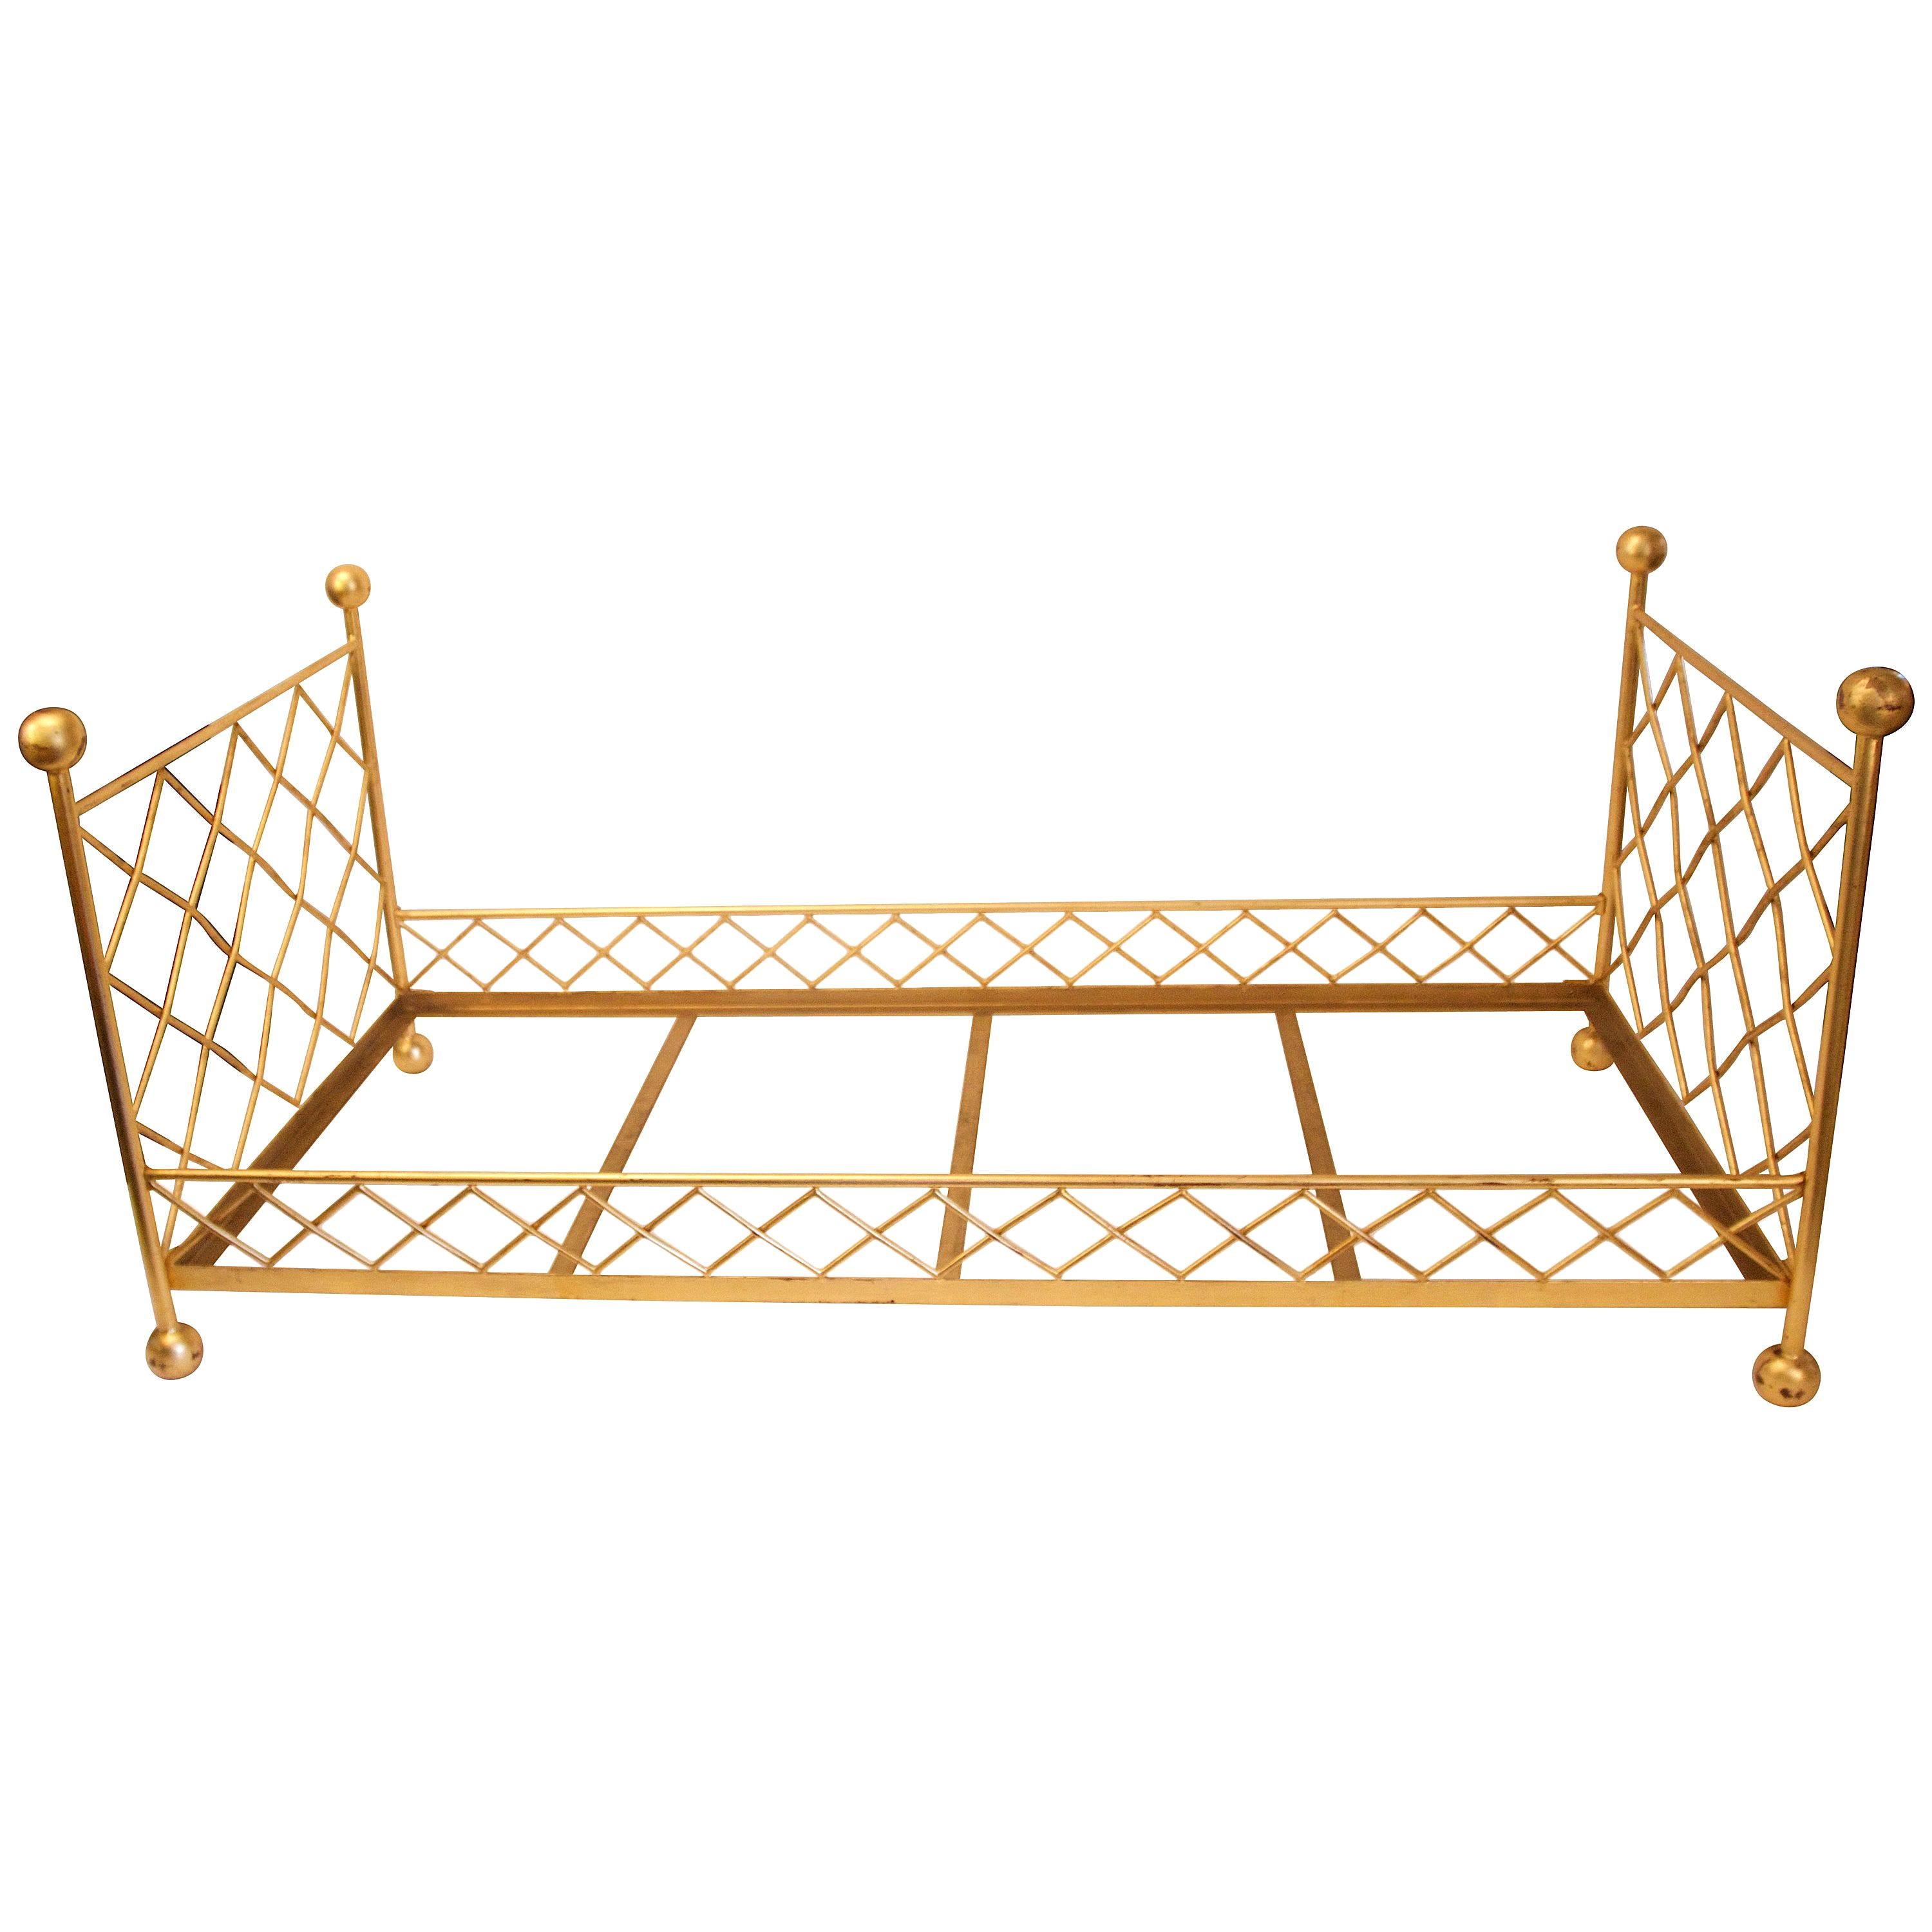 Bed, Gilded Metal with Braces, circa 2000, France